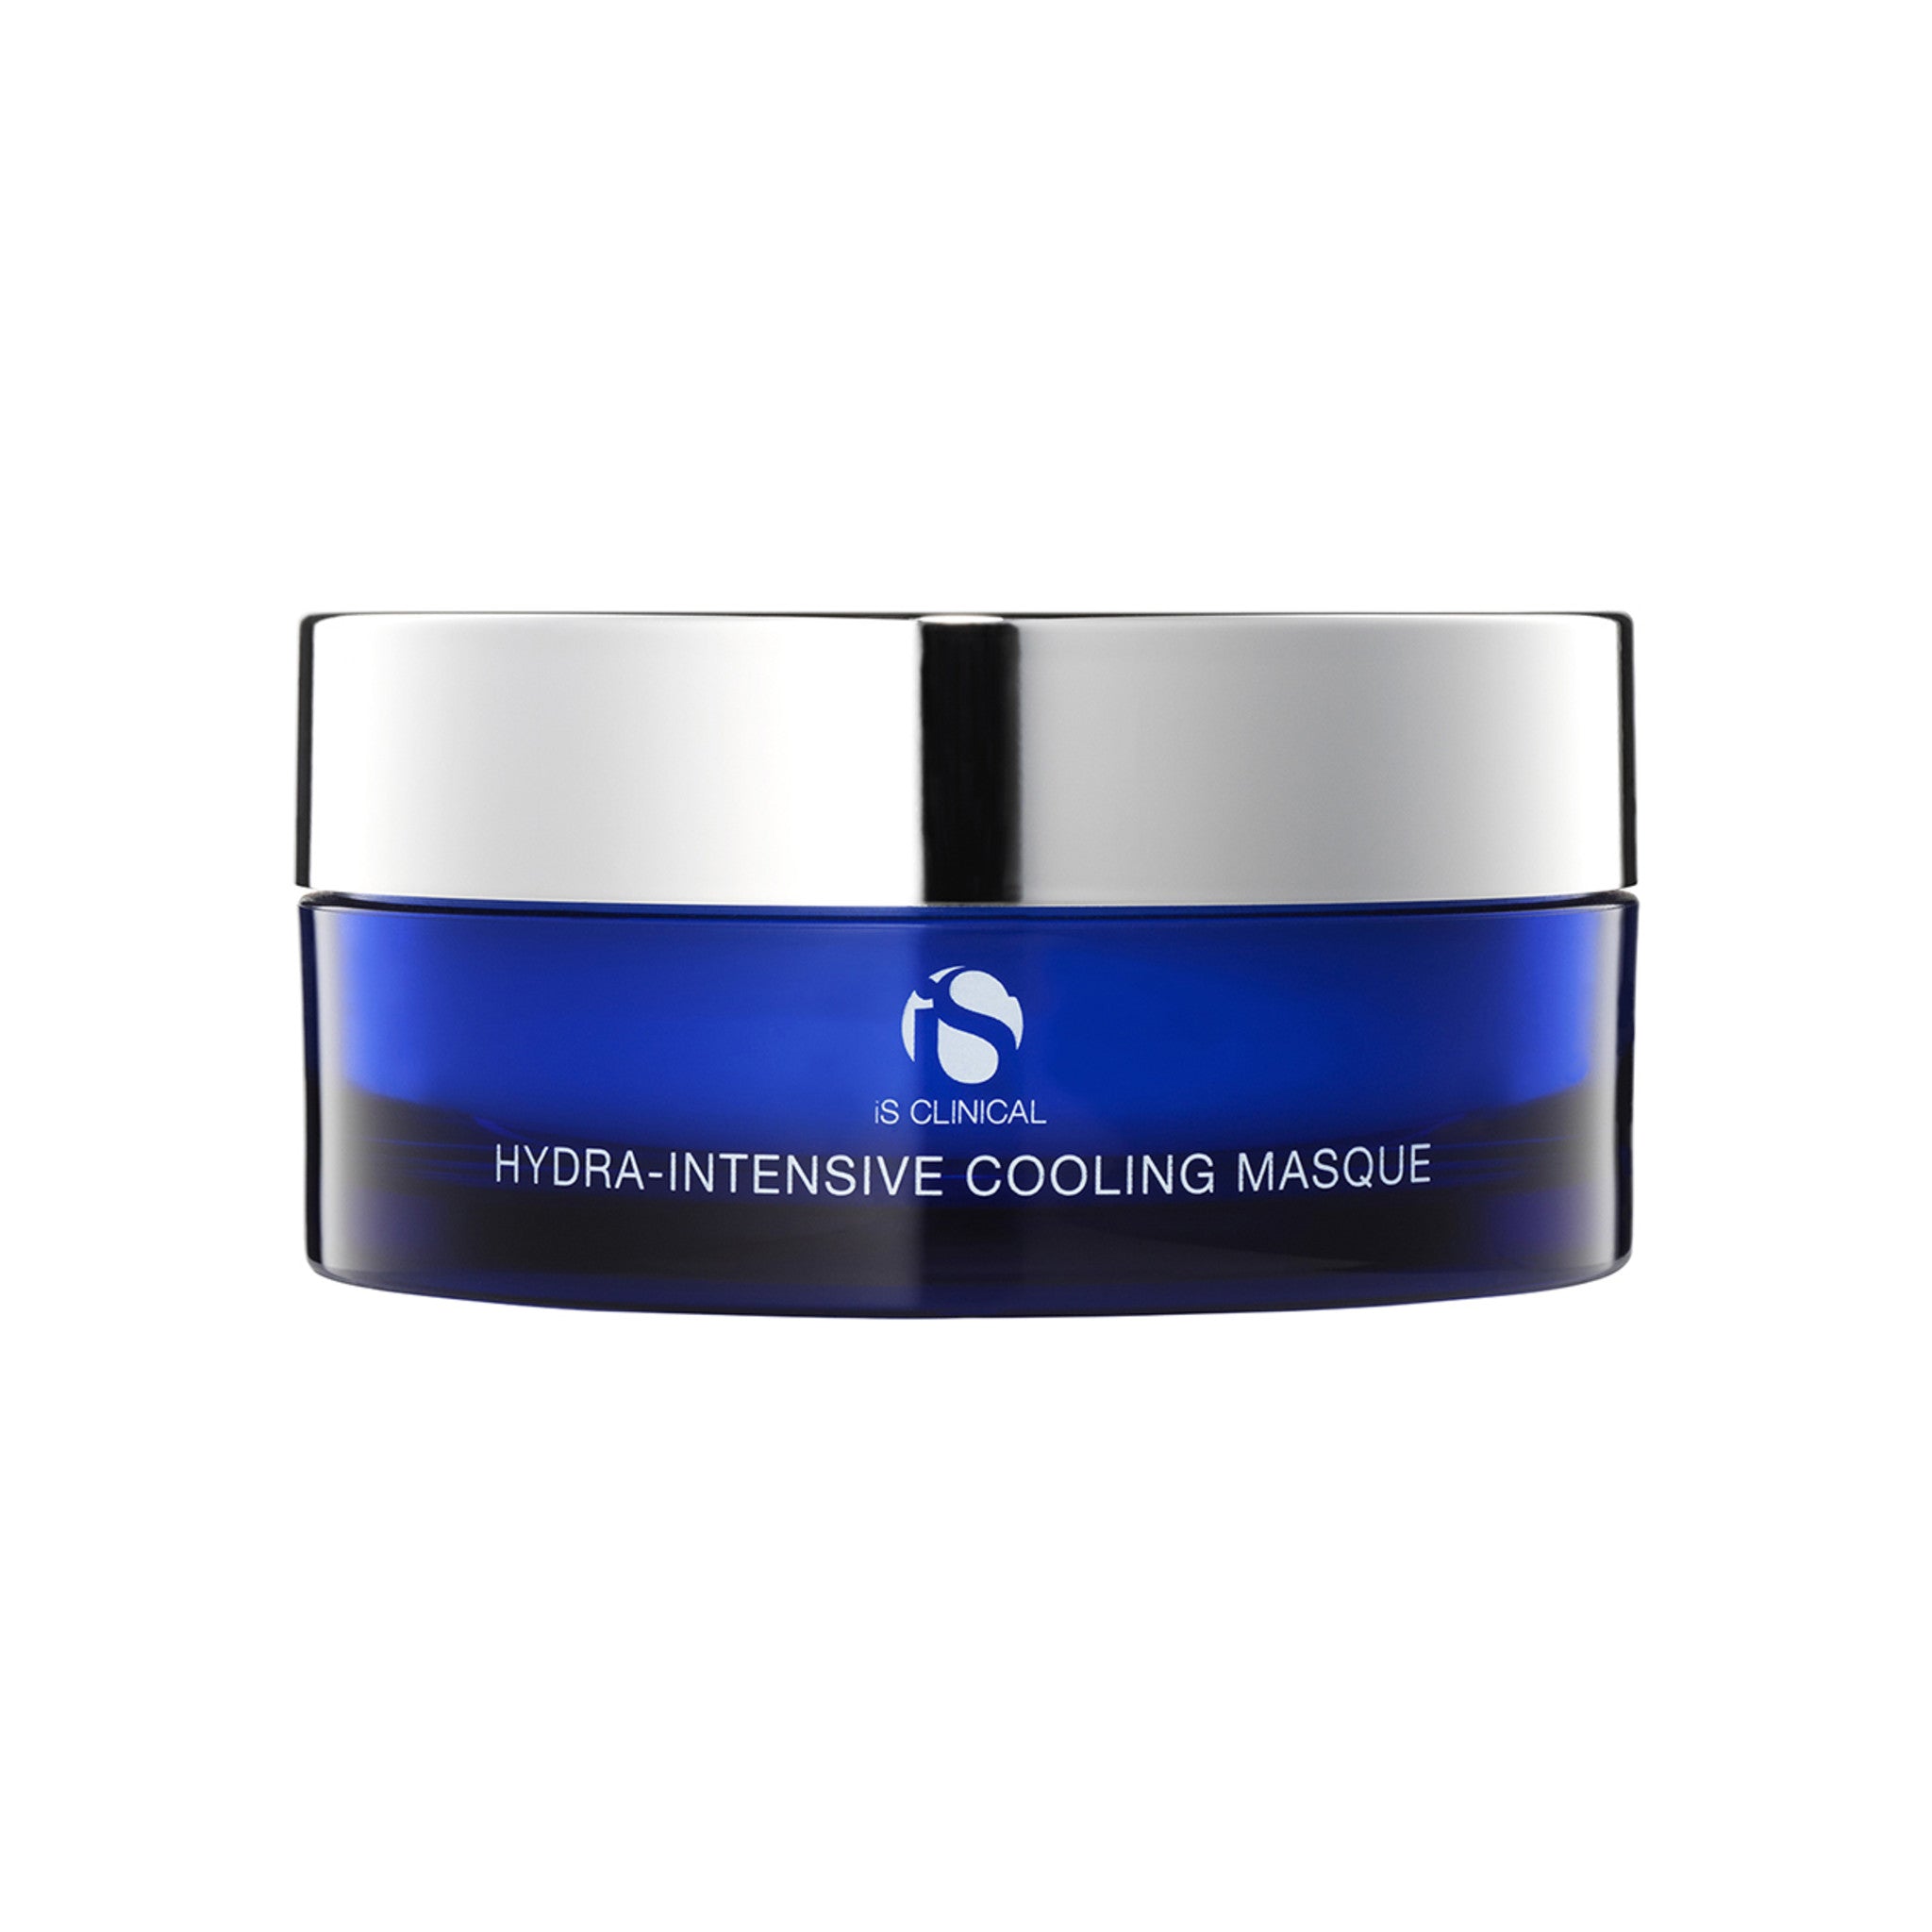 IS Clinical Hydra-Intensive Cooling Masque main image.